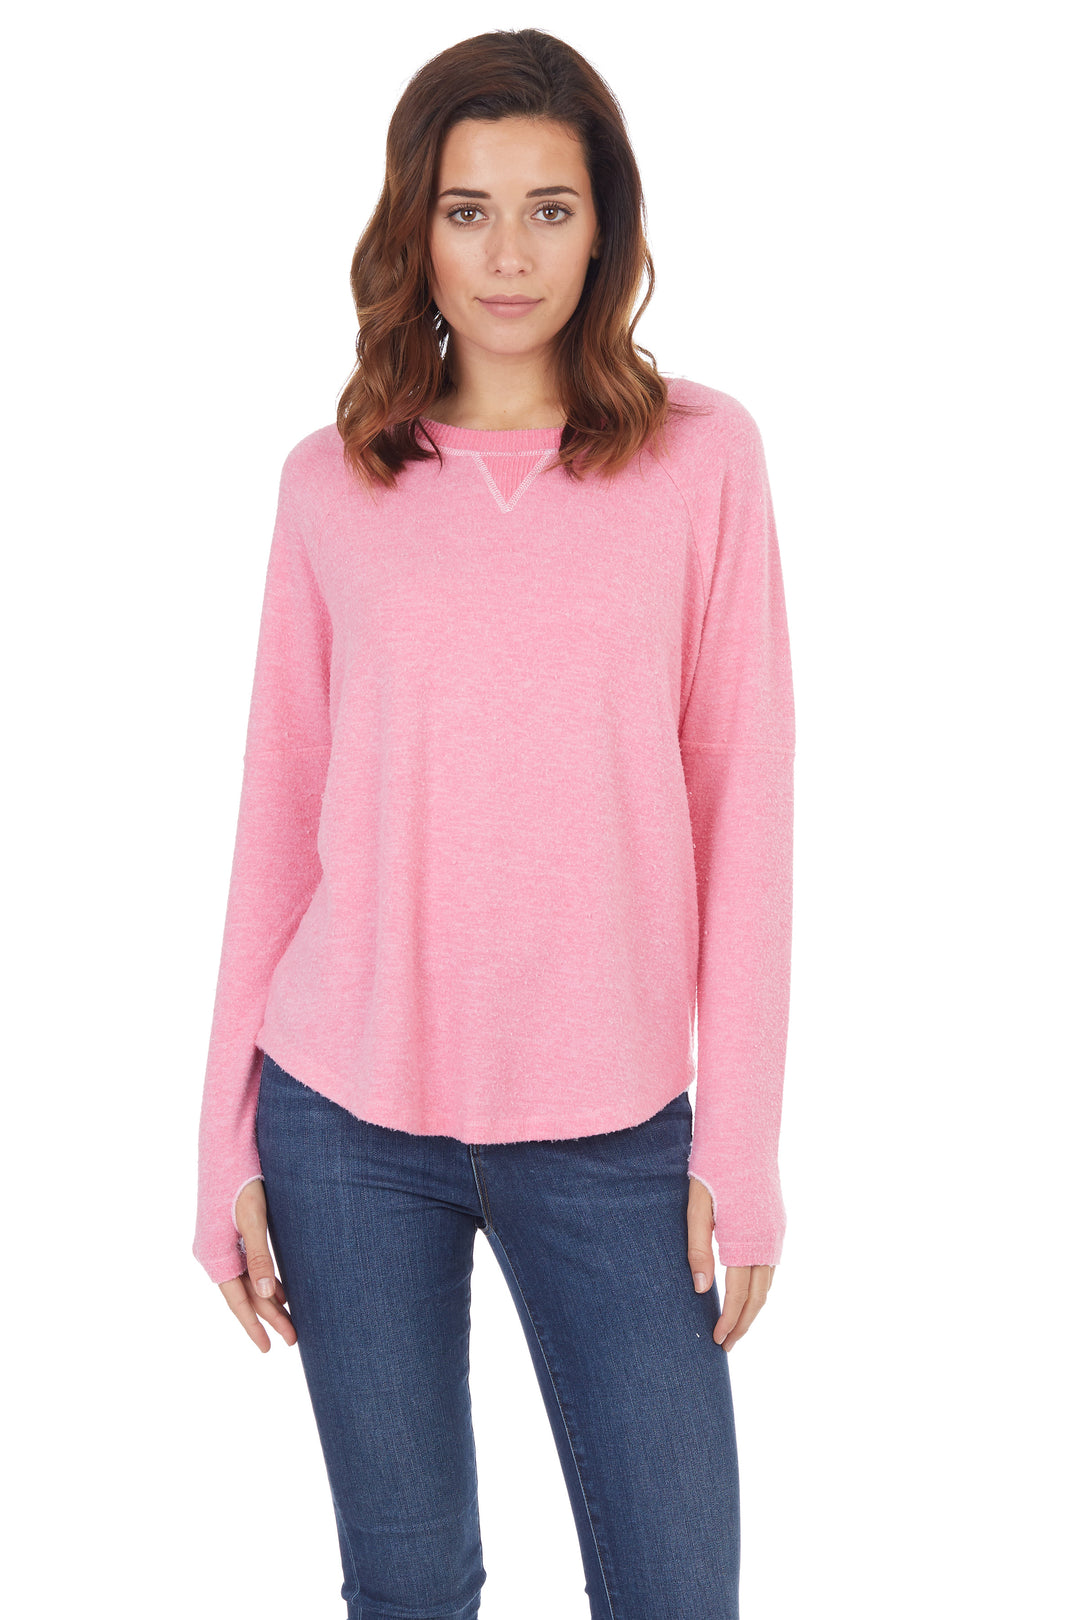 Pink Heather Knit Top With Thumbhole - Kingfisher Road - Online Boutique